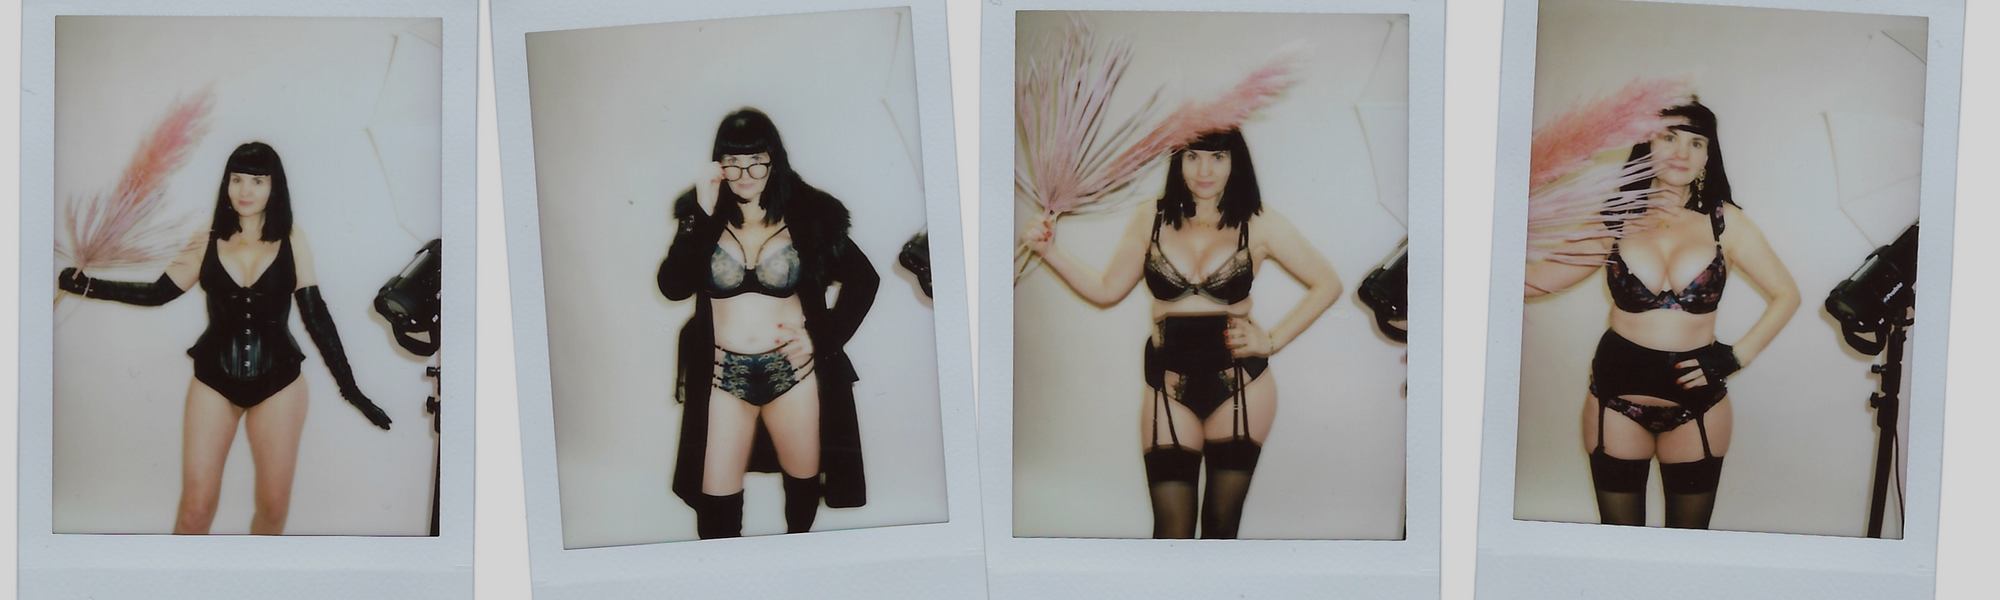 How to Accessorize and Style Lingerie - by our Founder, Emma!